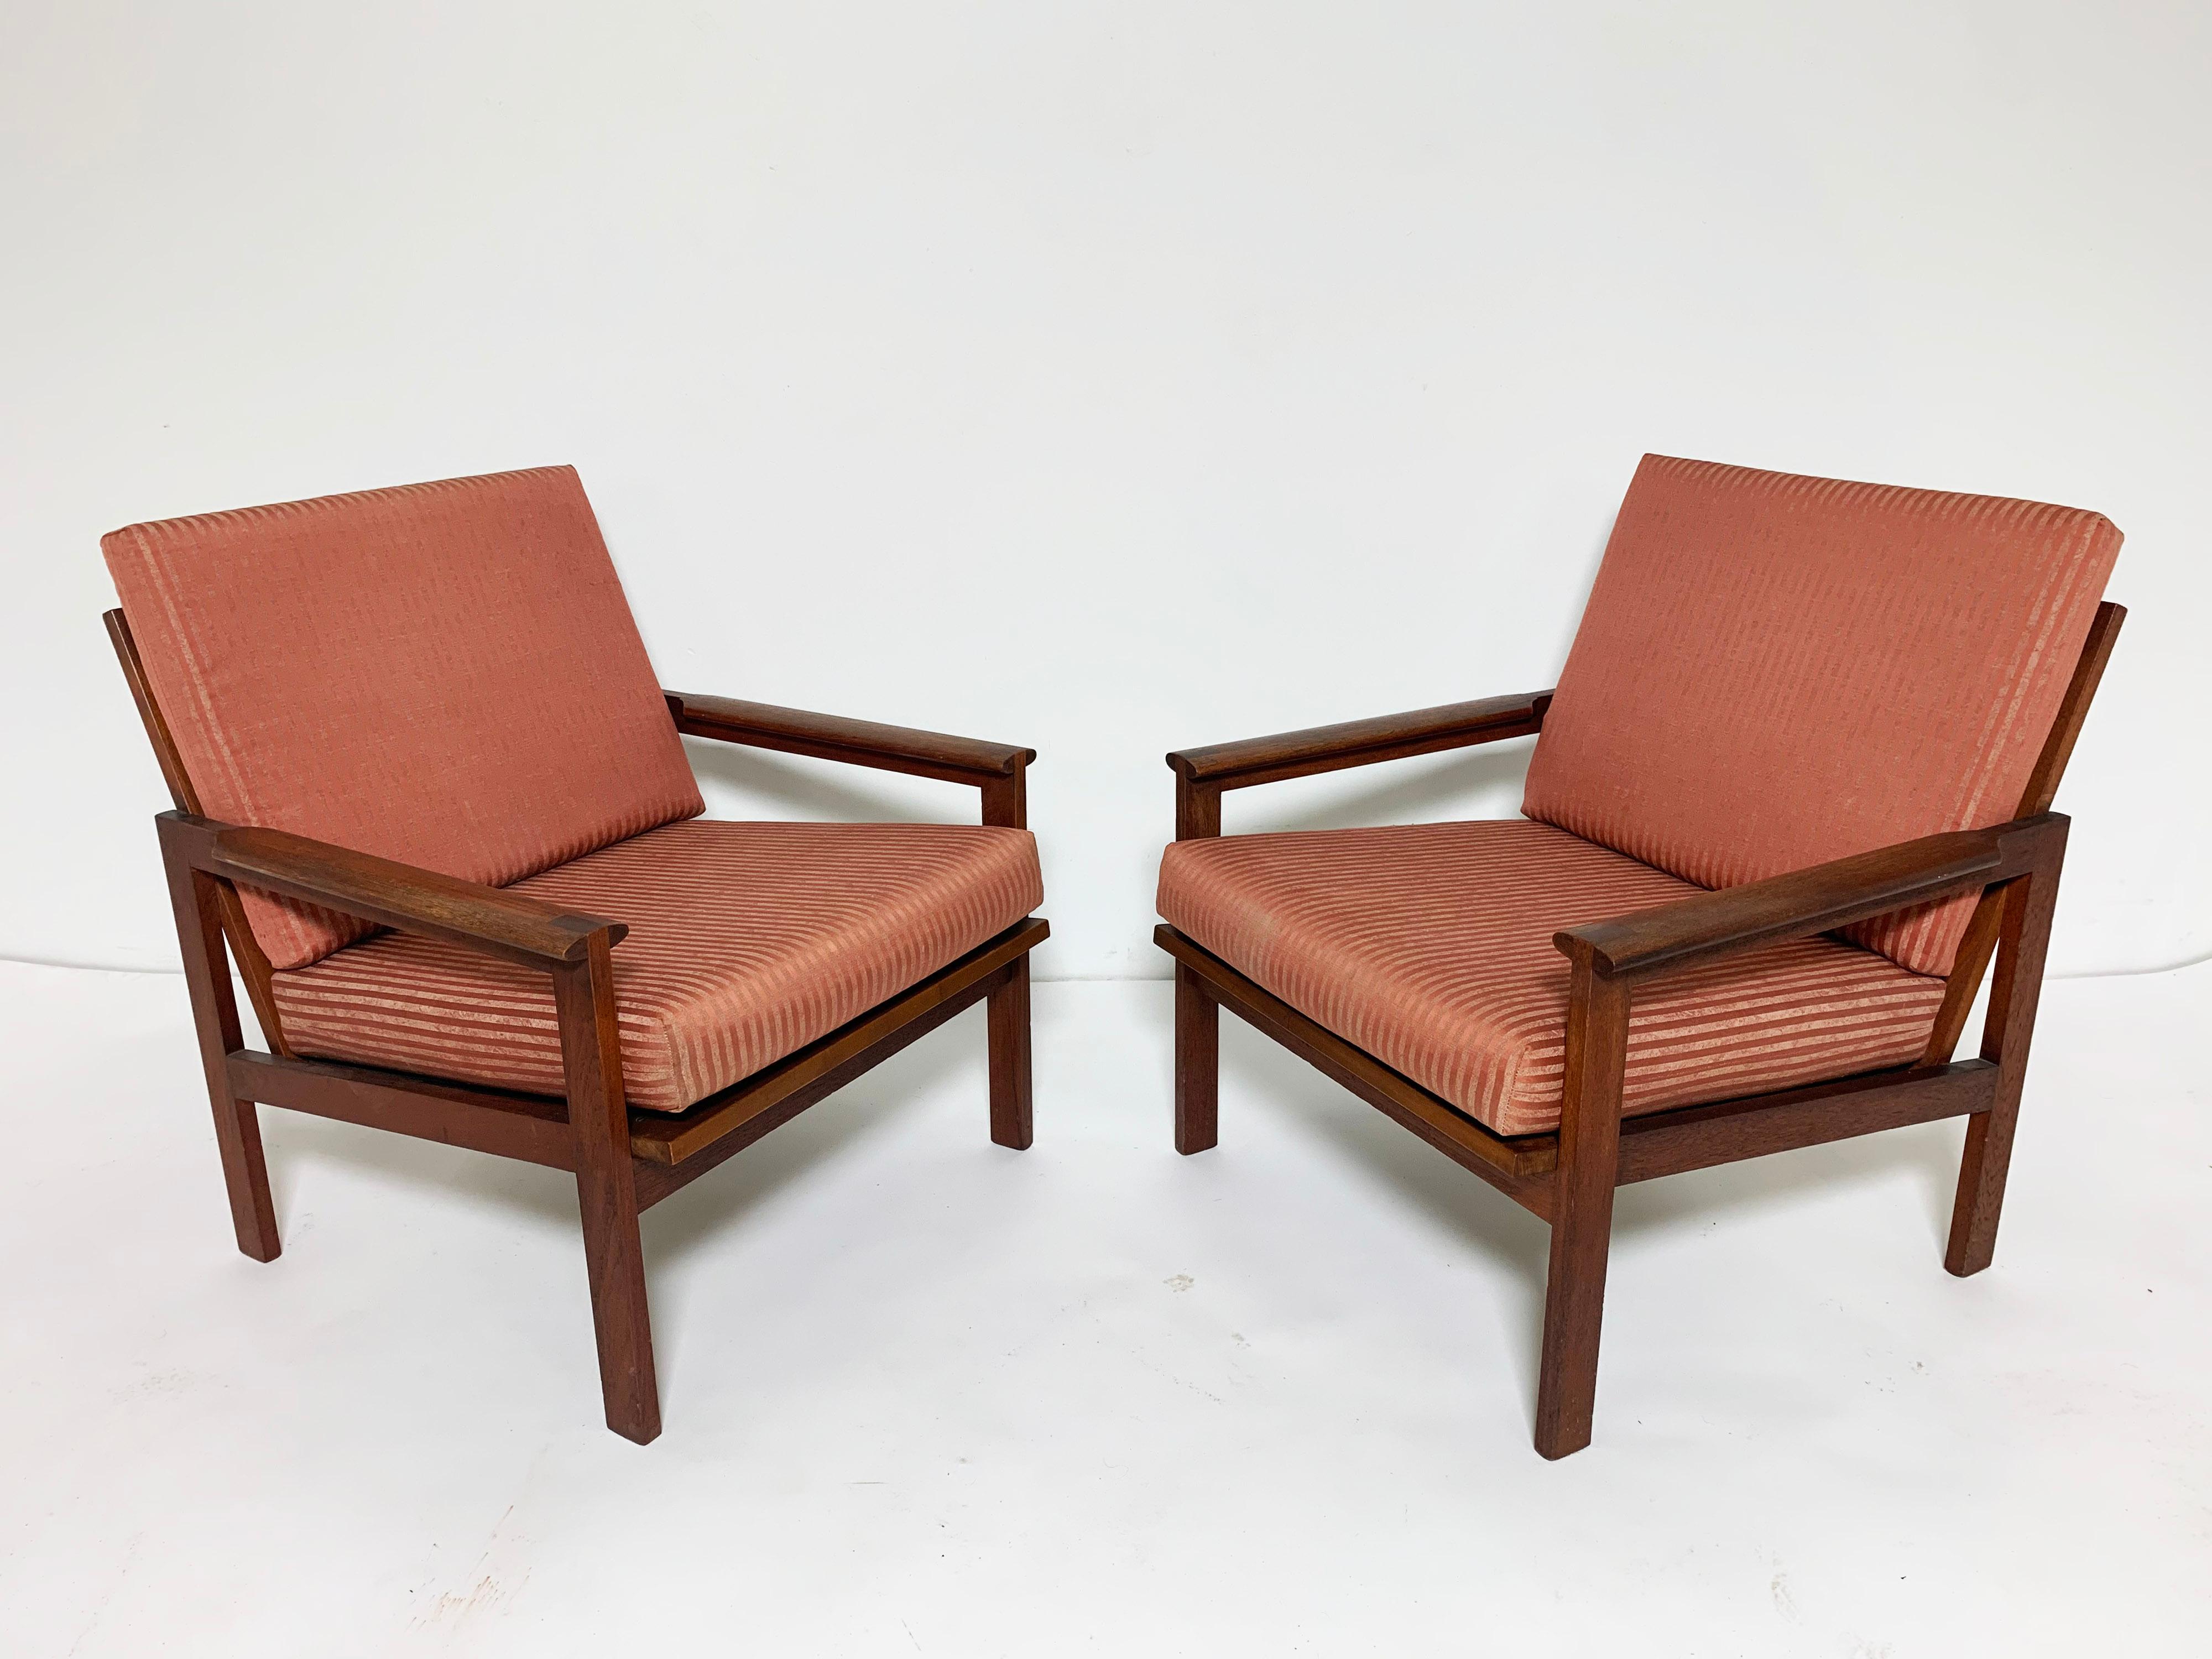 Pair of Danish teak lounge chairs by Illum Wilkkelso for Niels Eilersen, ca. 1960s.